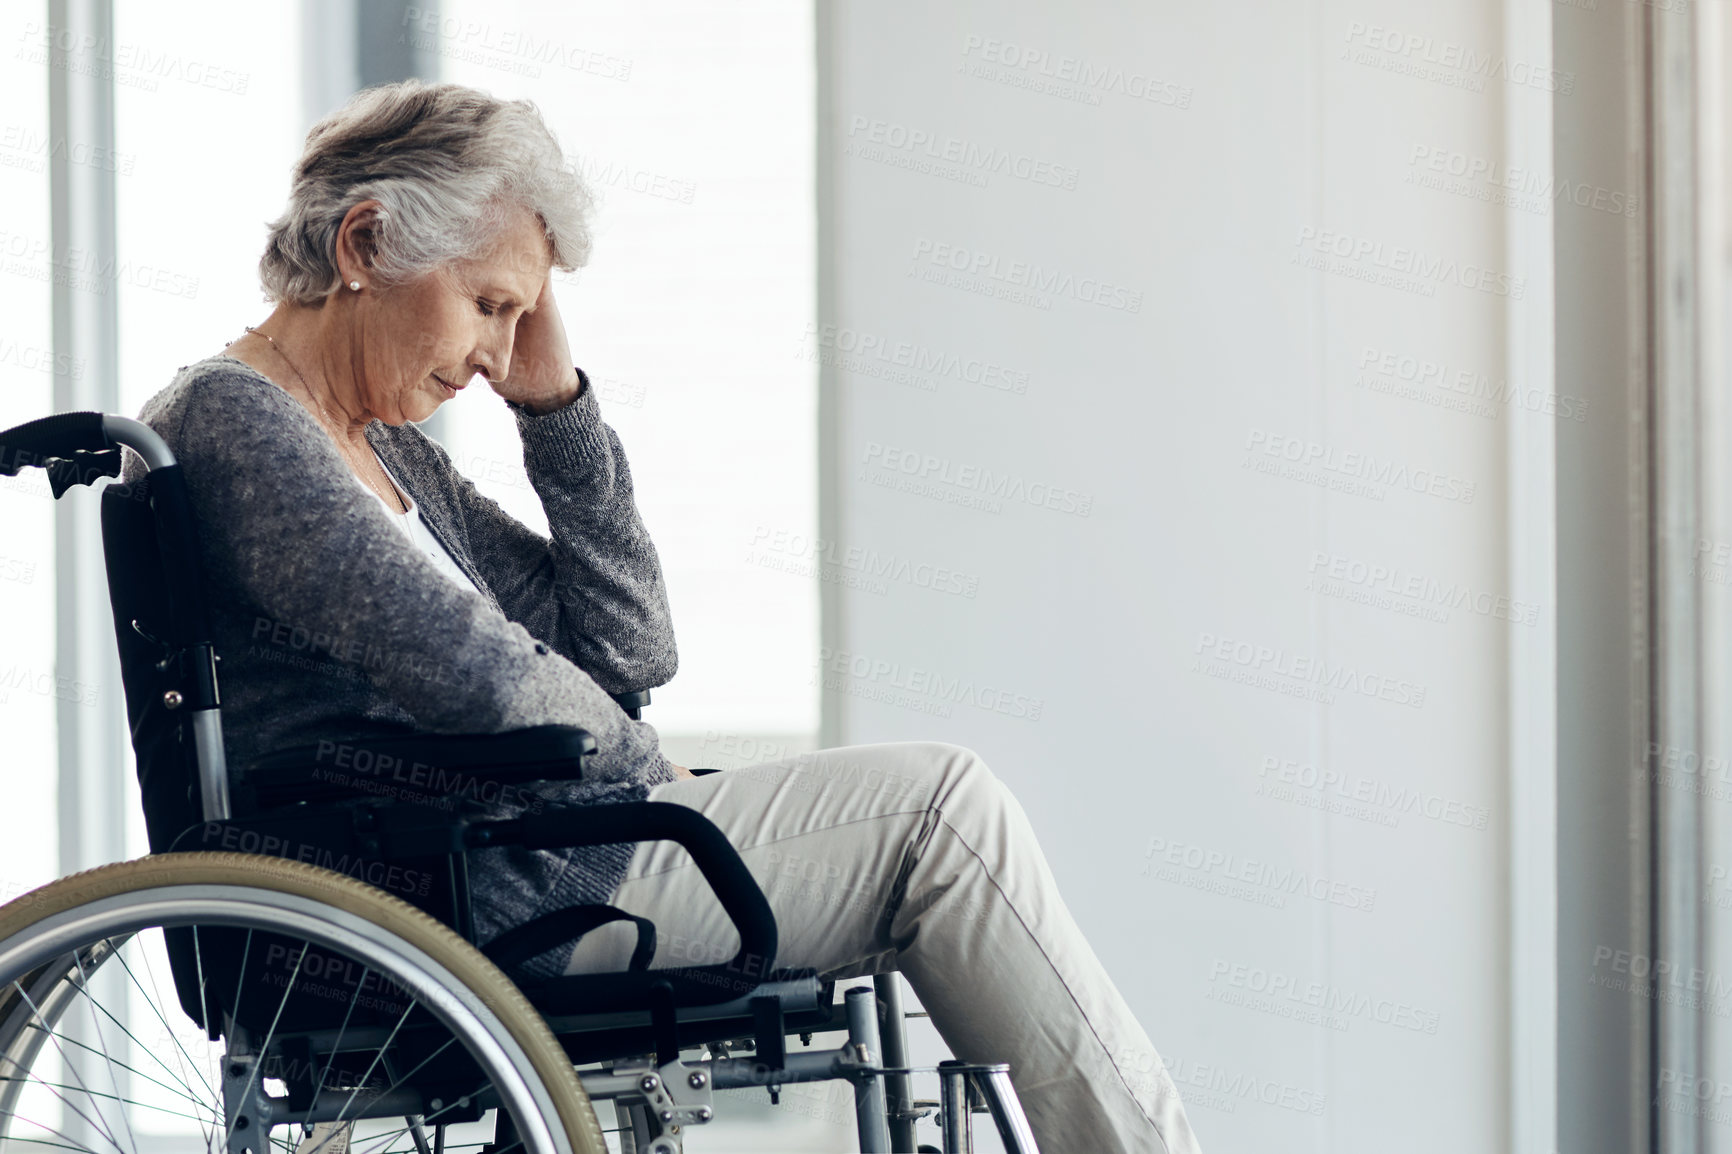 Buy stock photo Cropped shot of a senior woman sitting in a wheelchair